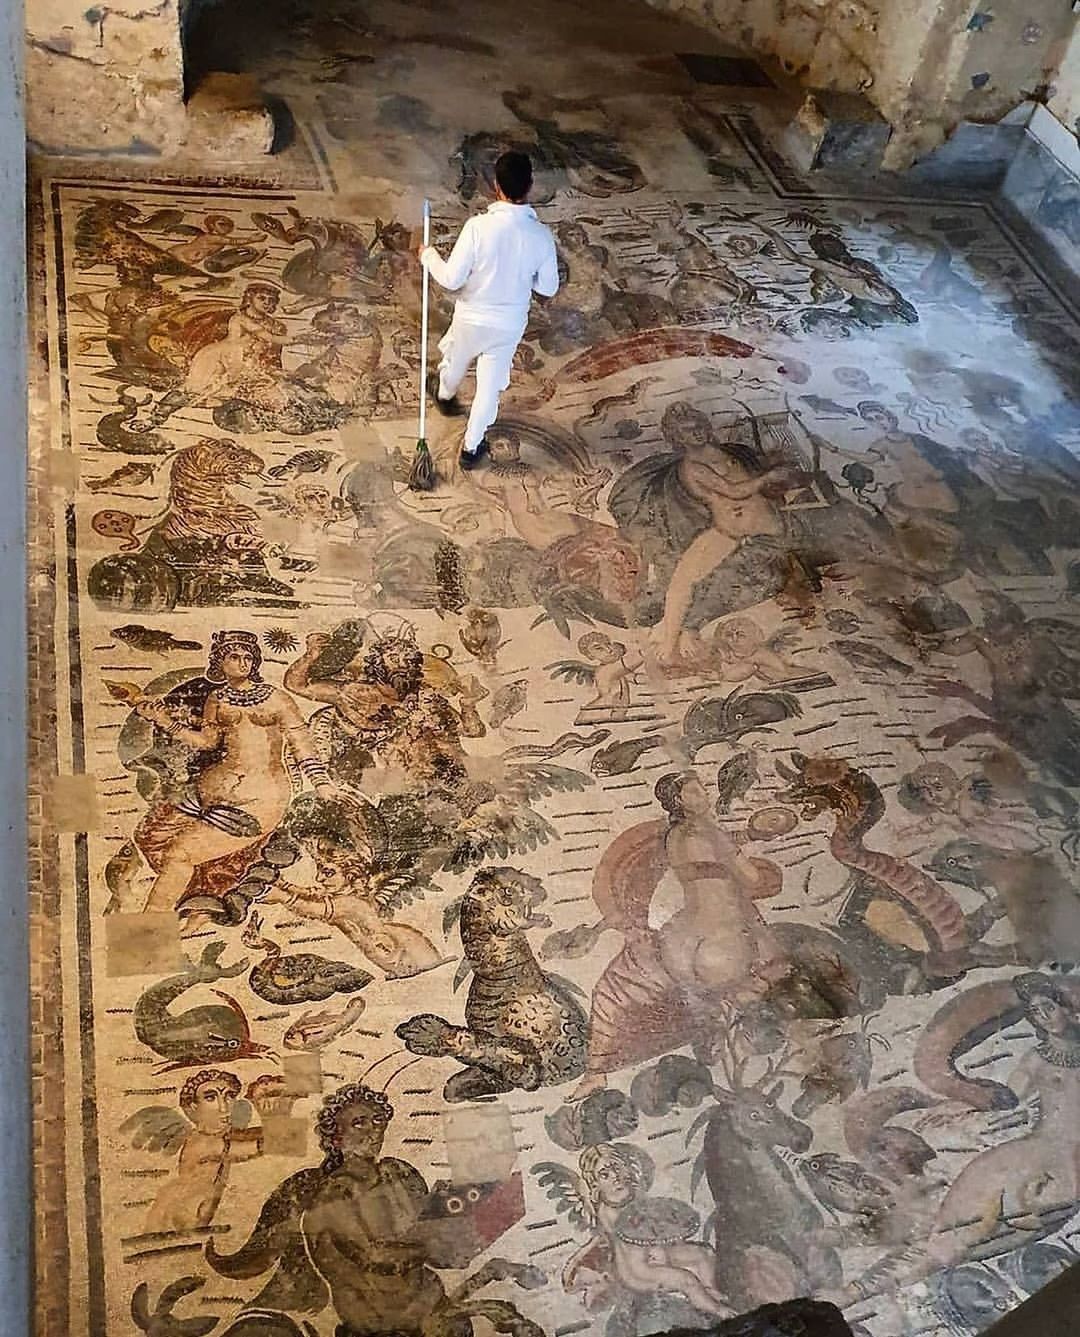 A large Roman mosaic depicting the Greek legend of Arion, who was a famous poet of Corinth in Greece. 300 CE, located at the Villa Romana del Casale in Sicily.jpg